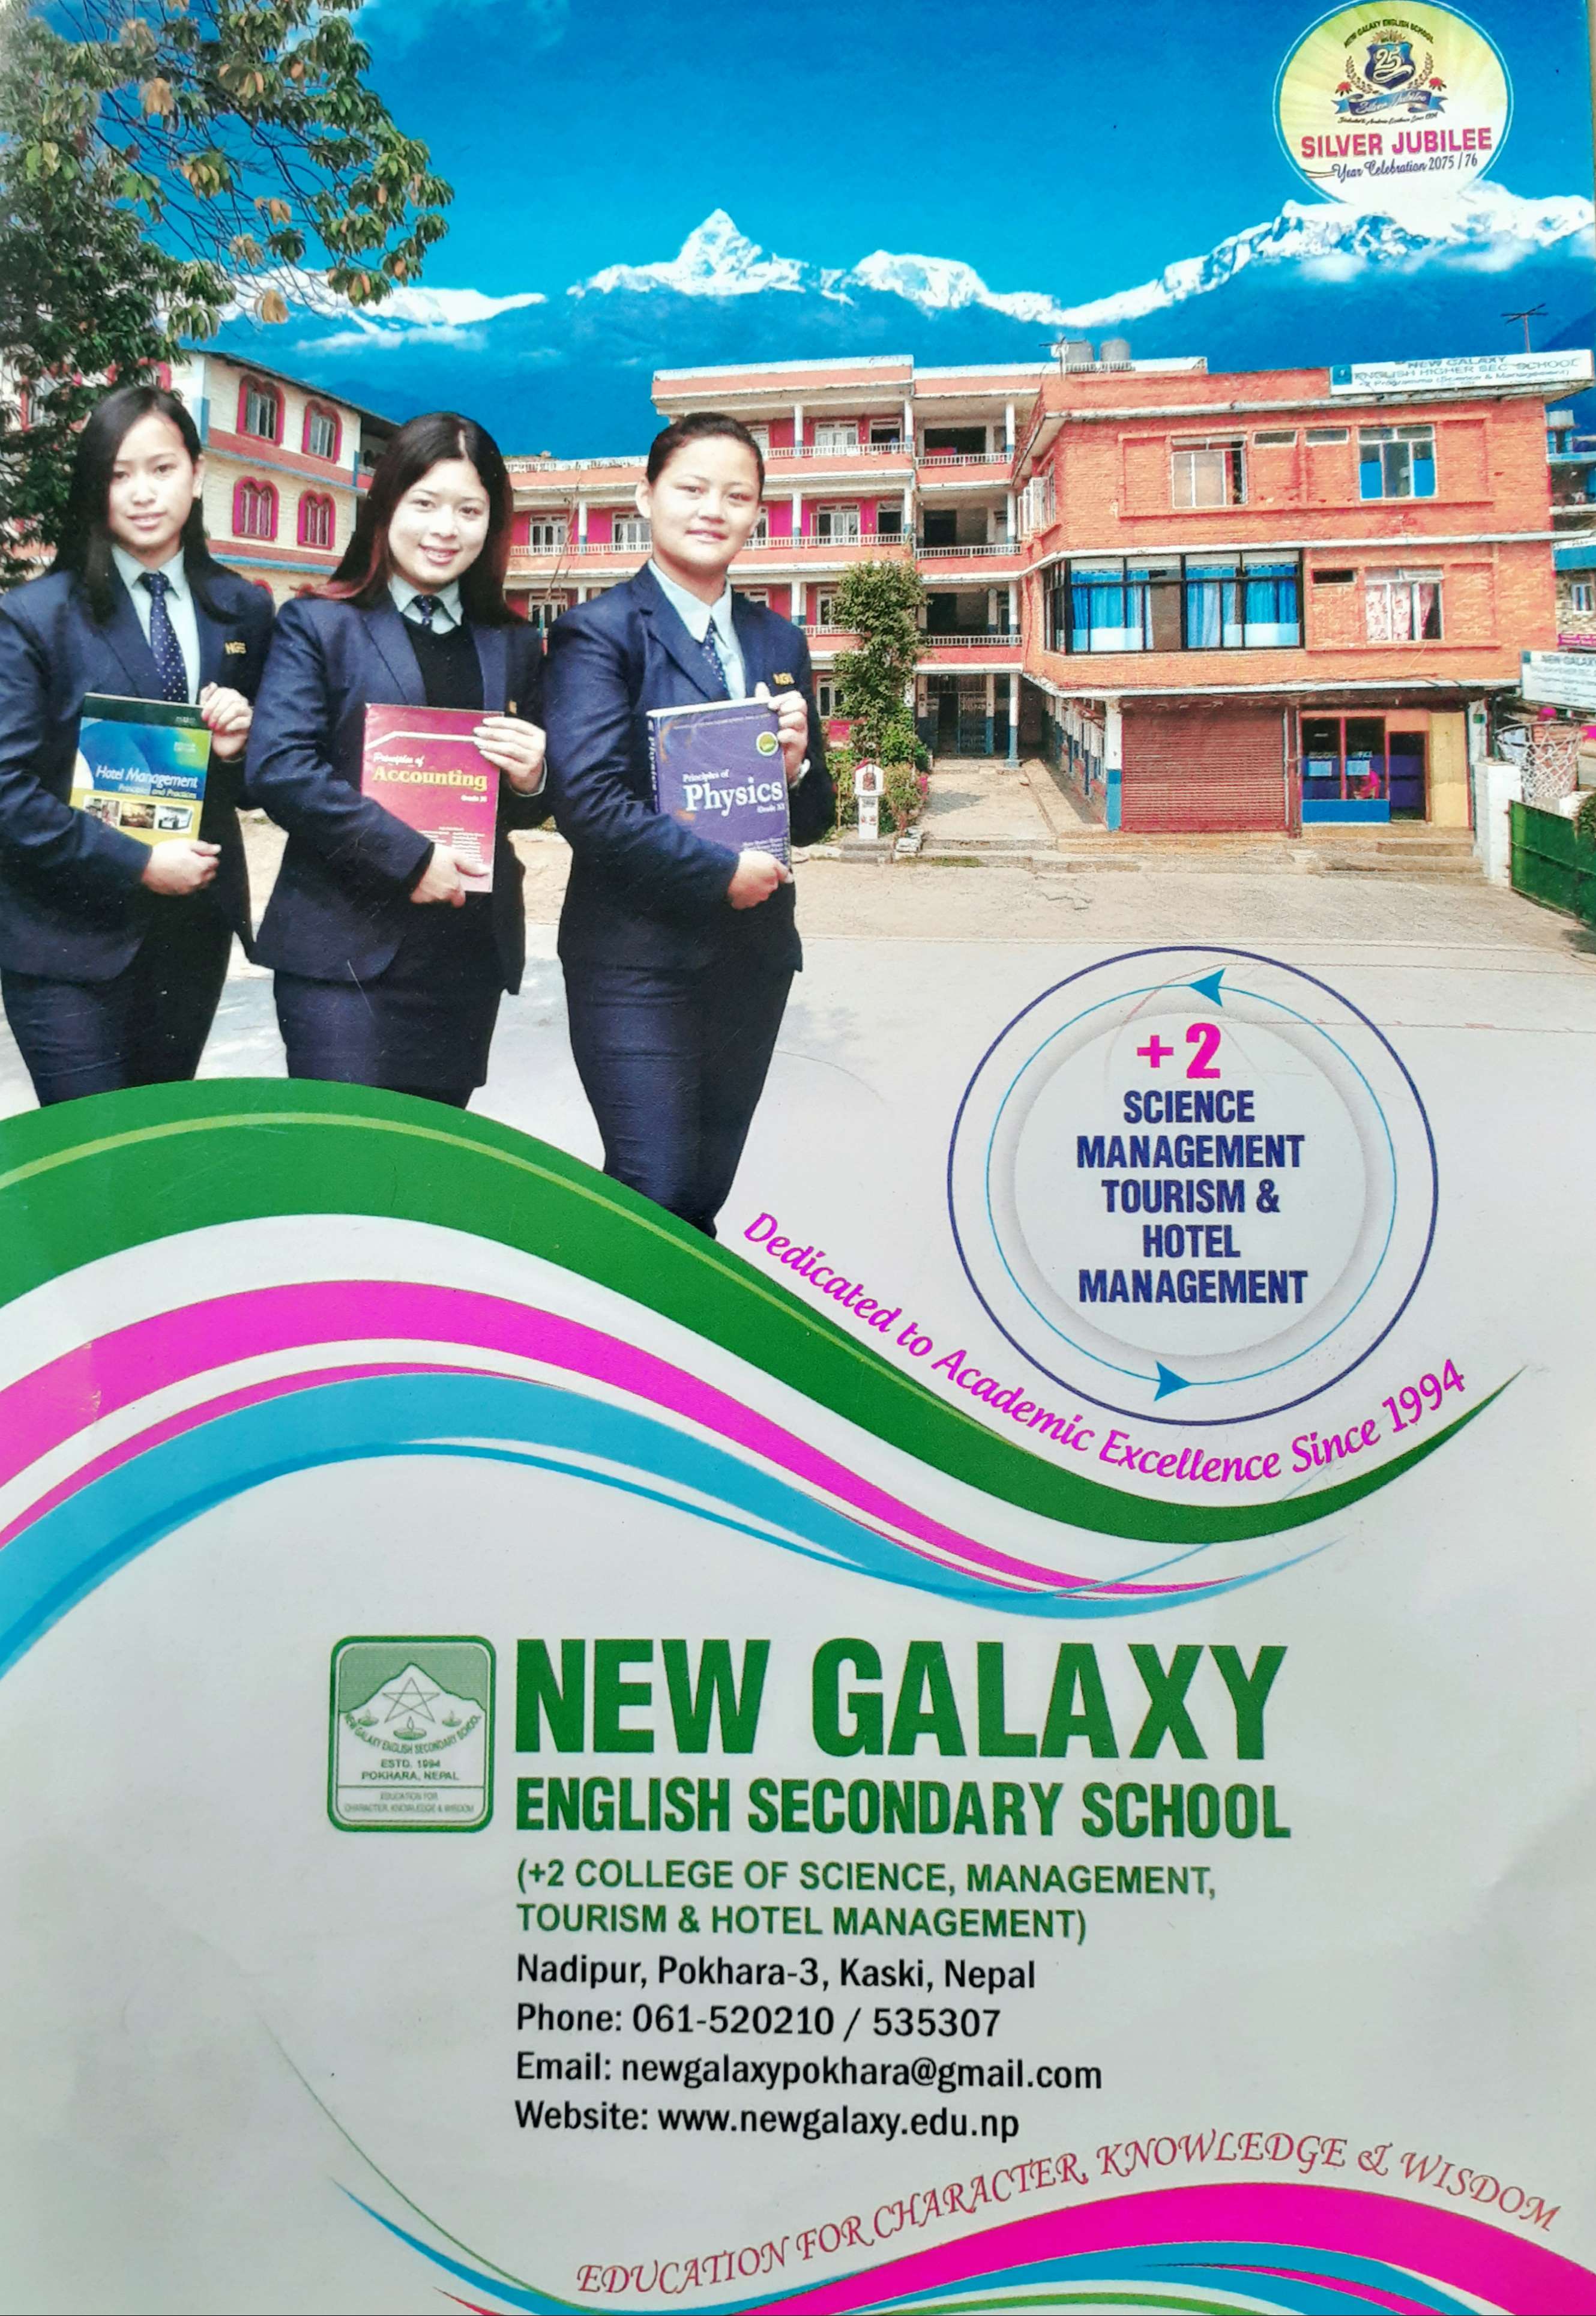 New Galaxy School / College of Science, Management, Tourism & Hotel Management